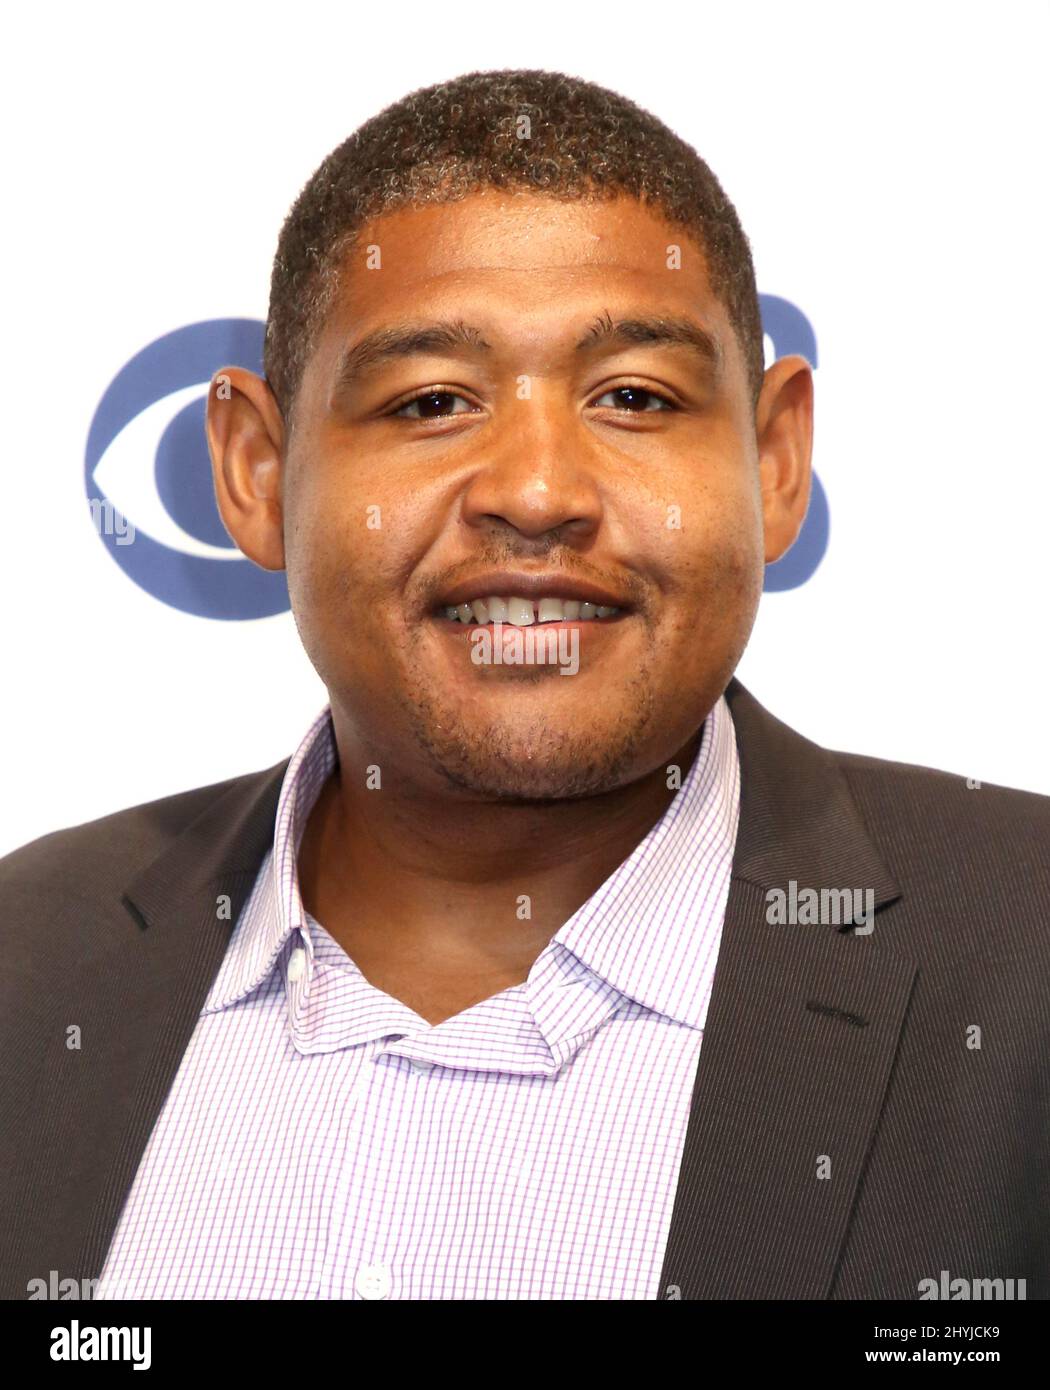 Omar Benson Miller attending the CBS 2019 Upfront held at Todd English Food Hall Stock Photo